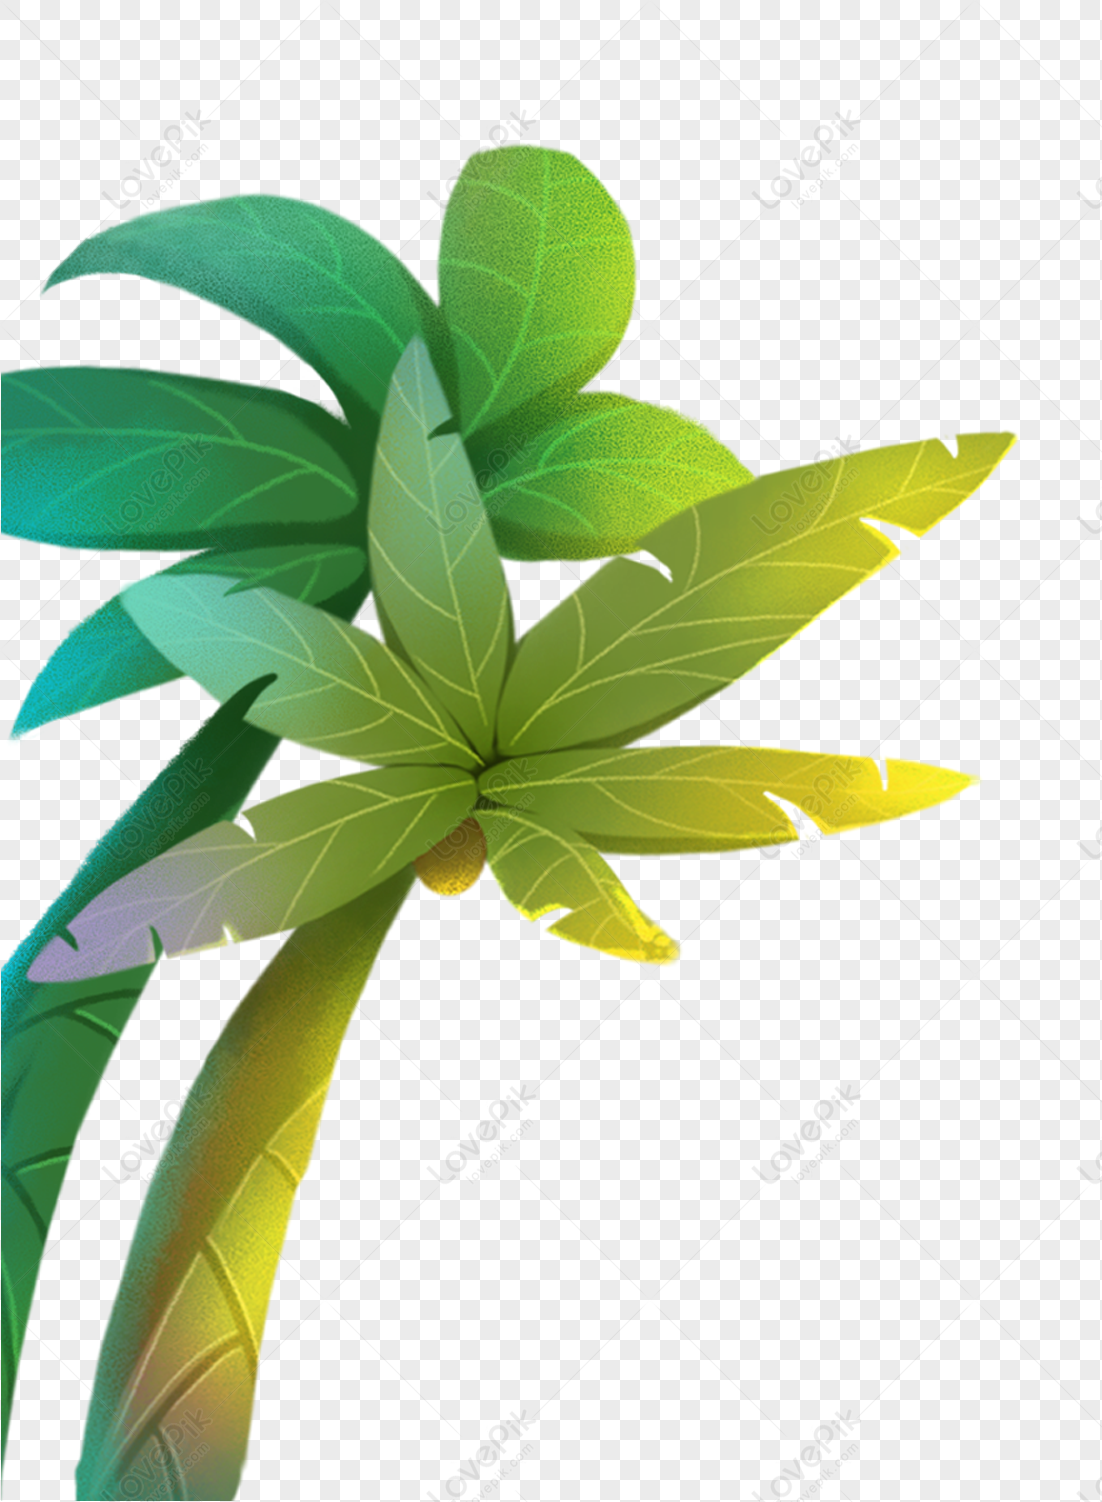 Coconut Tree PNG Transparent Background And Clipart Image For Free Download  - Lovepik | 400254350